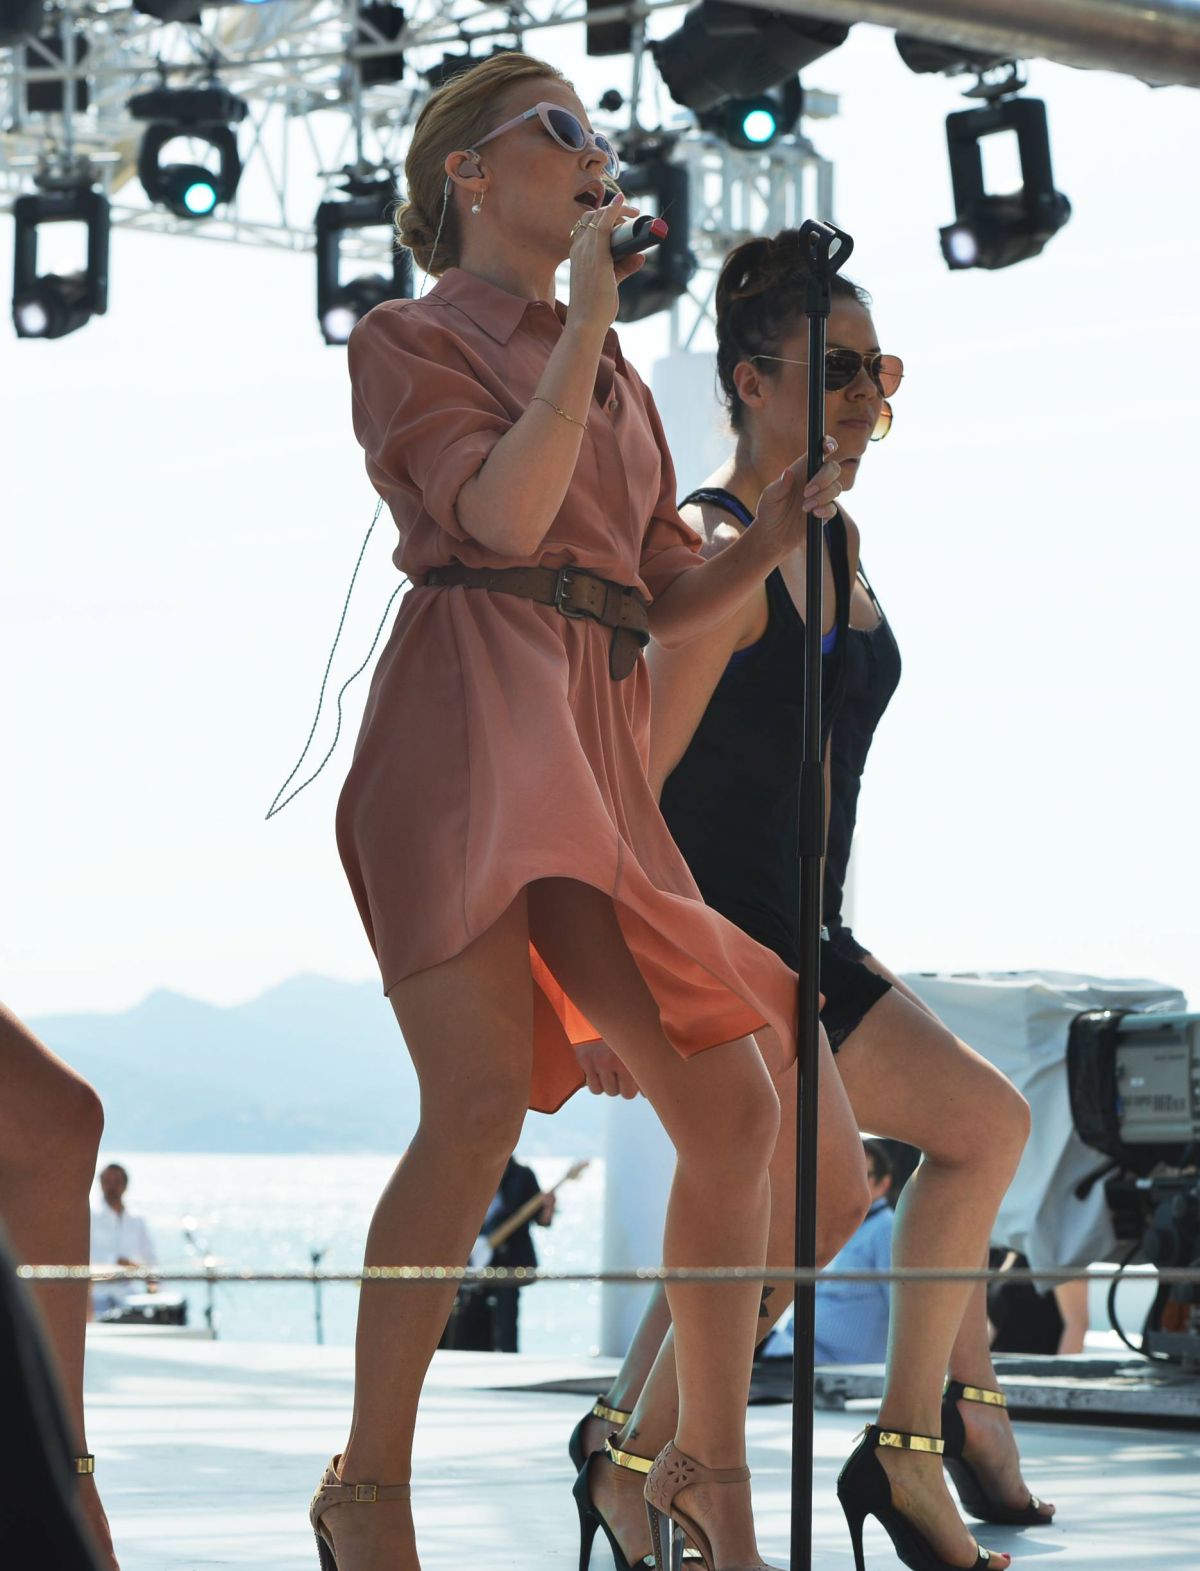 https://www.hawtcelebs.com/wp-content/uploads/2014/05/kylie-minogue-performs-at-stage-of-canal-in-cannes_6.jpg